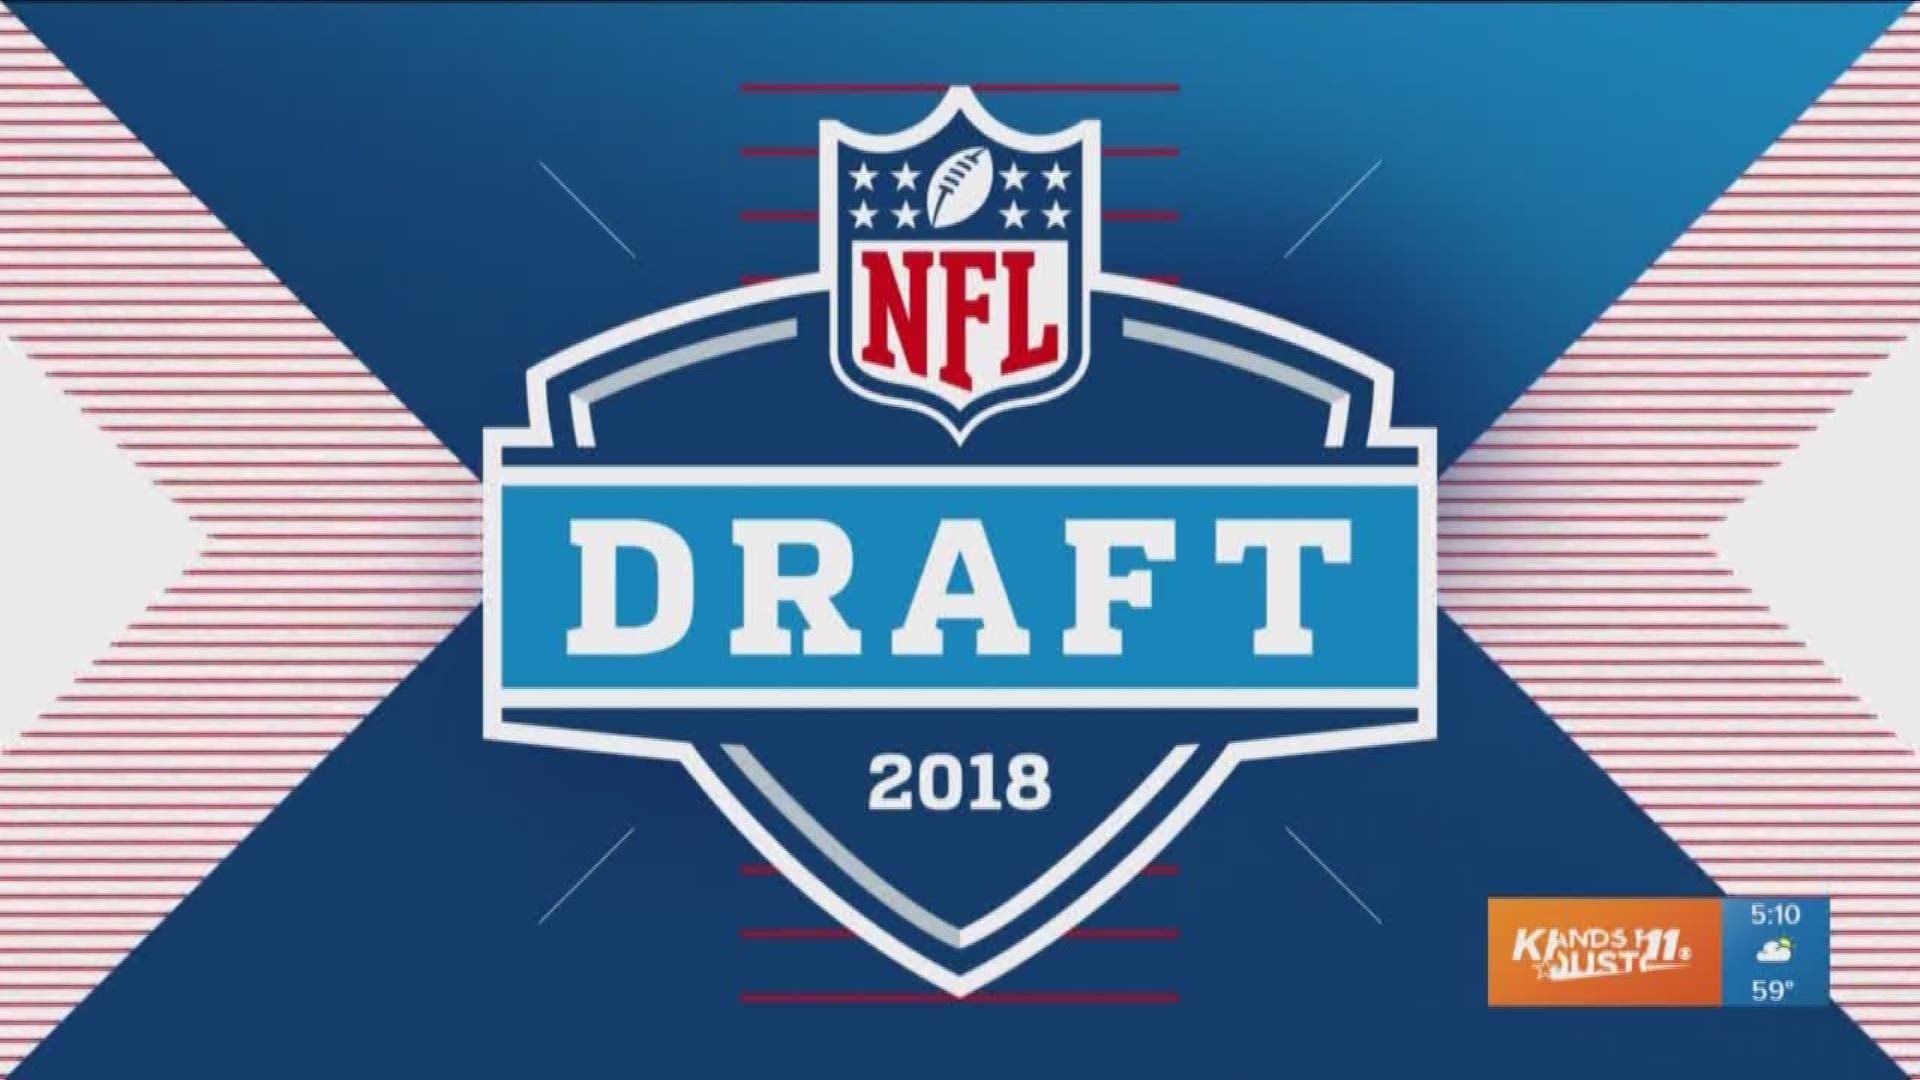 The NFL Draft kicks off at AT&T Stadium in Arlington Thursday night, and this year the Houston Astros are pulling for one guy. Sports Director Jason Bristol breaks down all the draft facts guaranteed to impress your friends and co-workers.